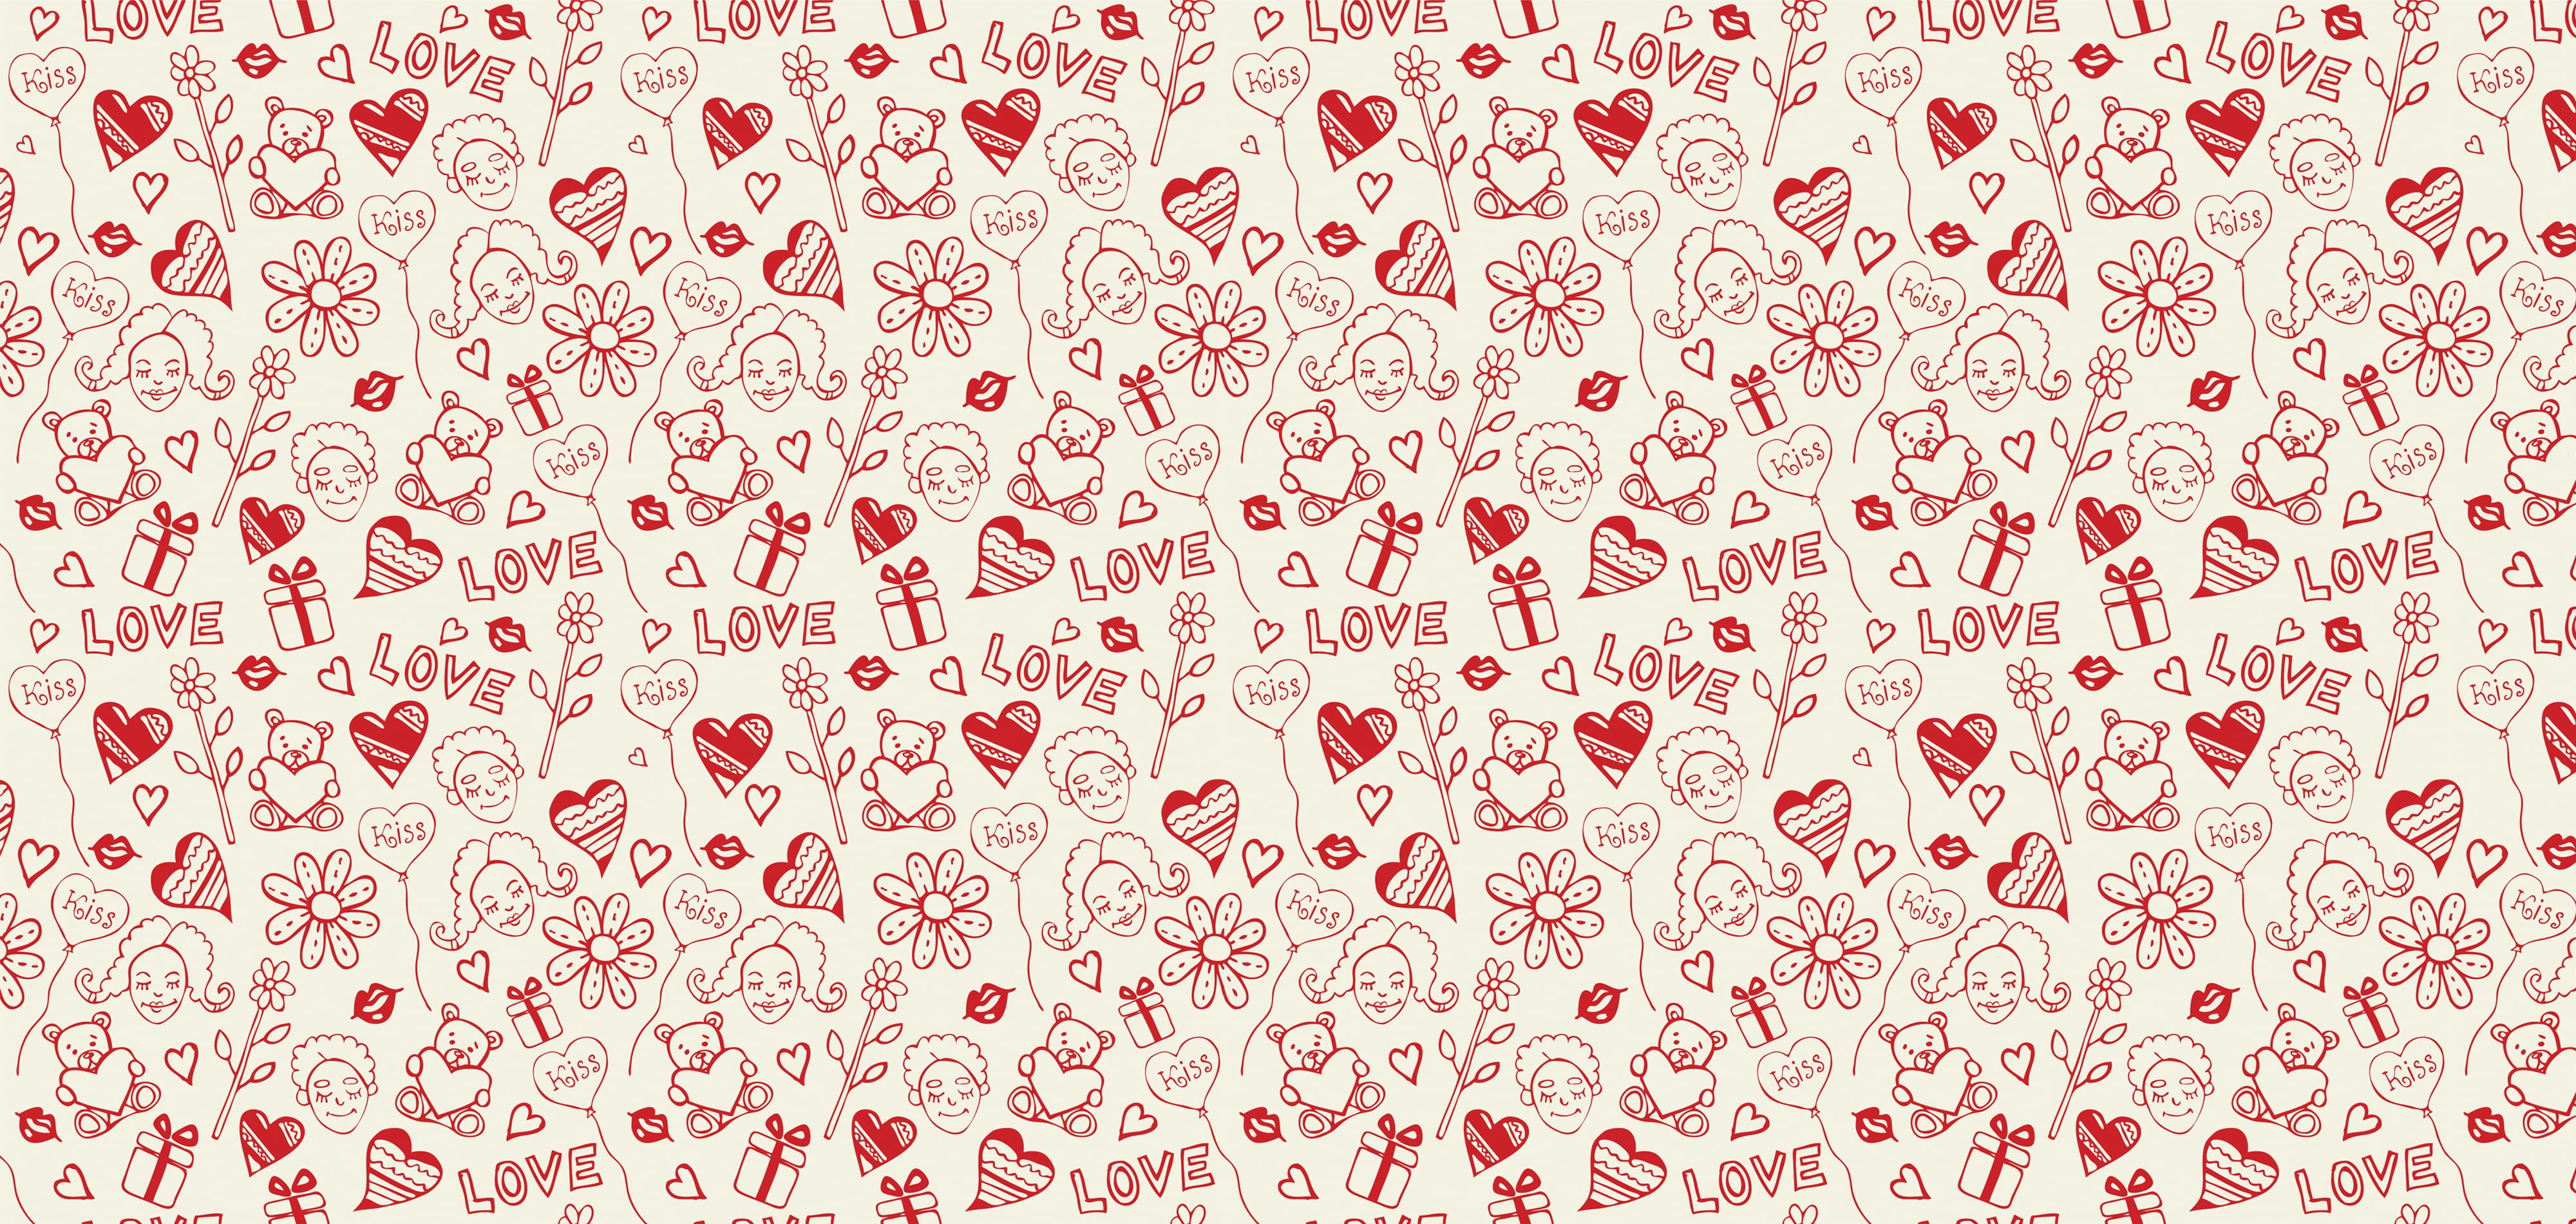 red and white love, hearts, and bears wallpaper, background, pattern